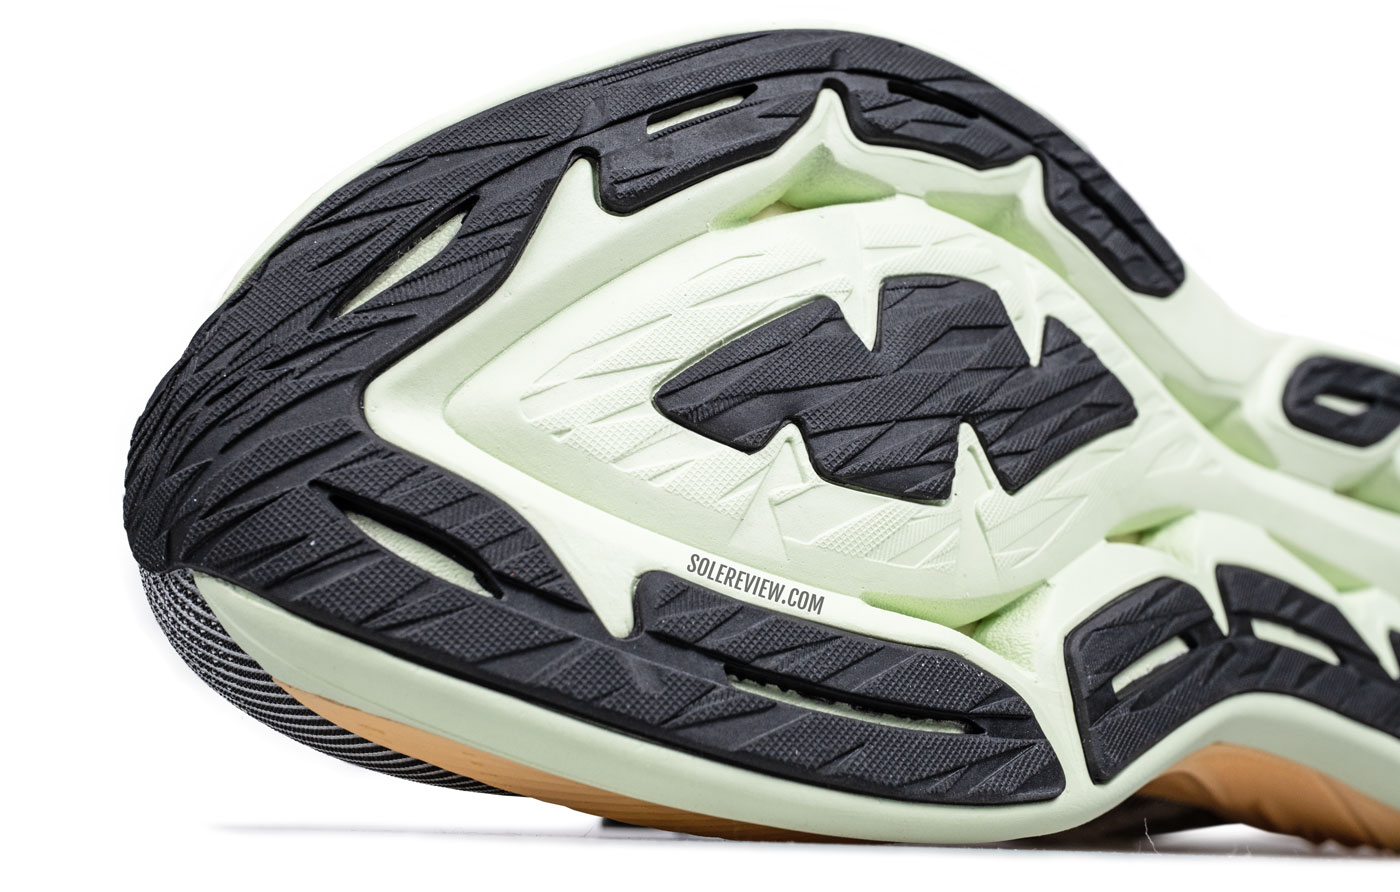 The forefoot outsole of the Asics Superblast.